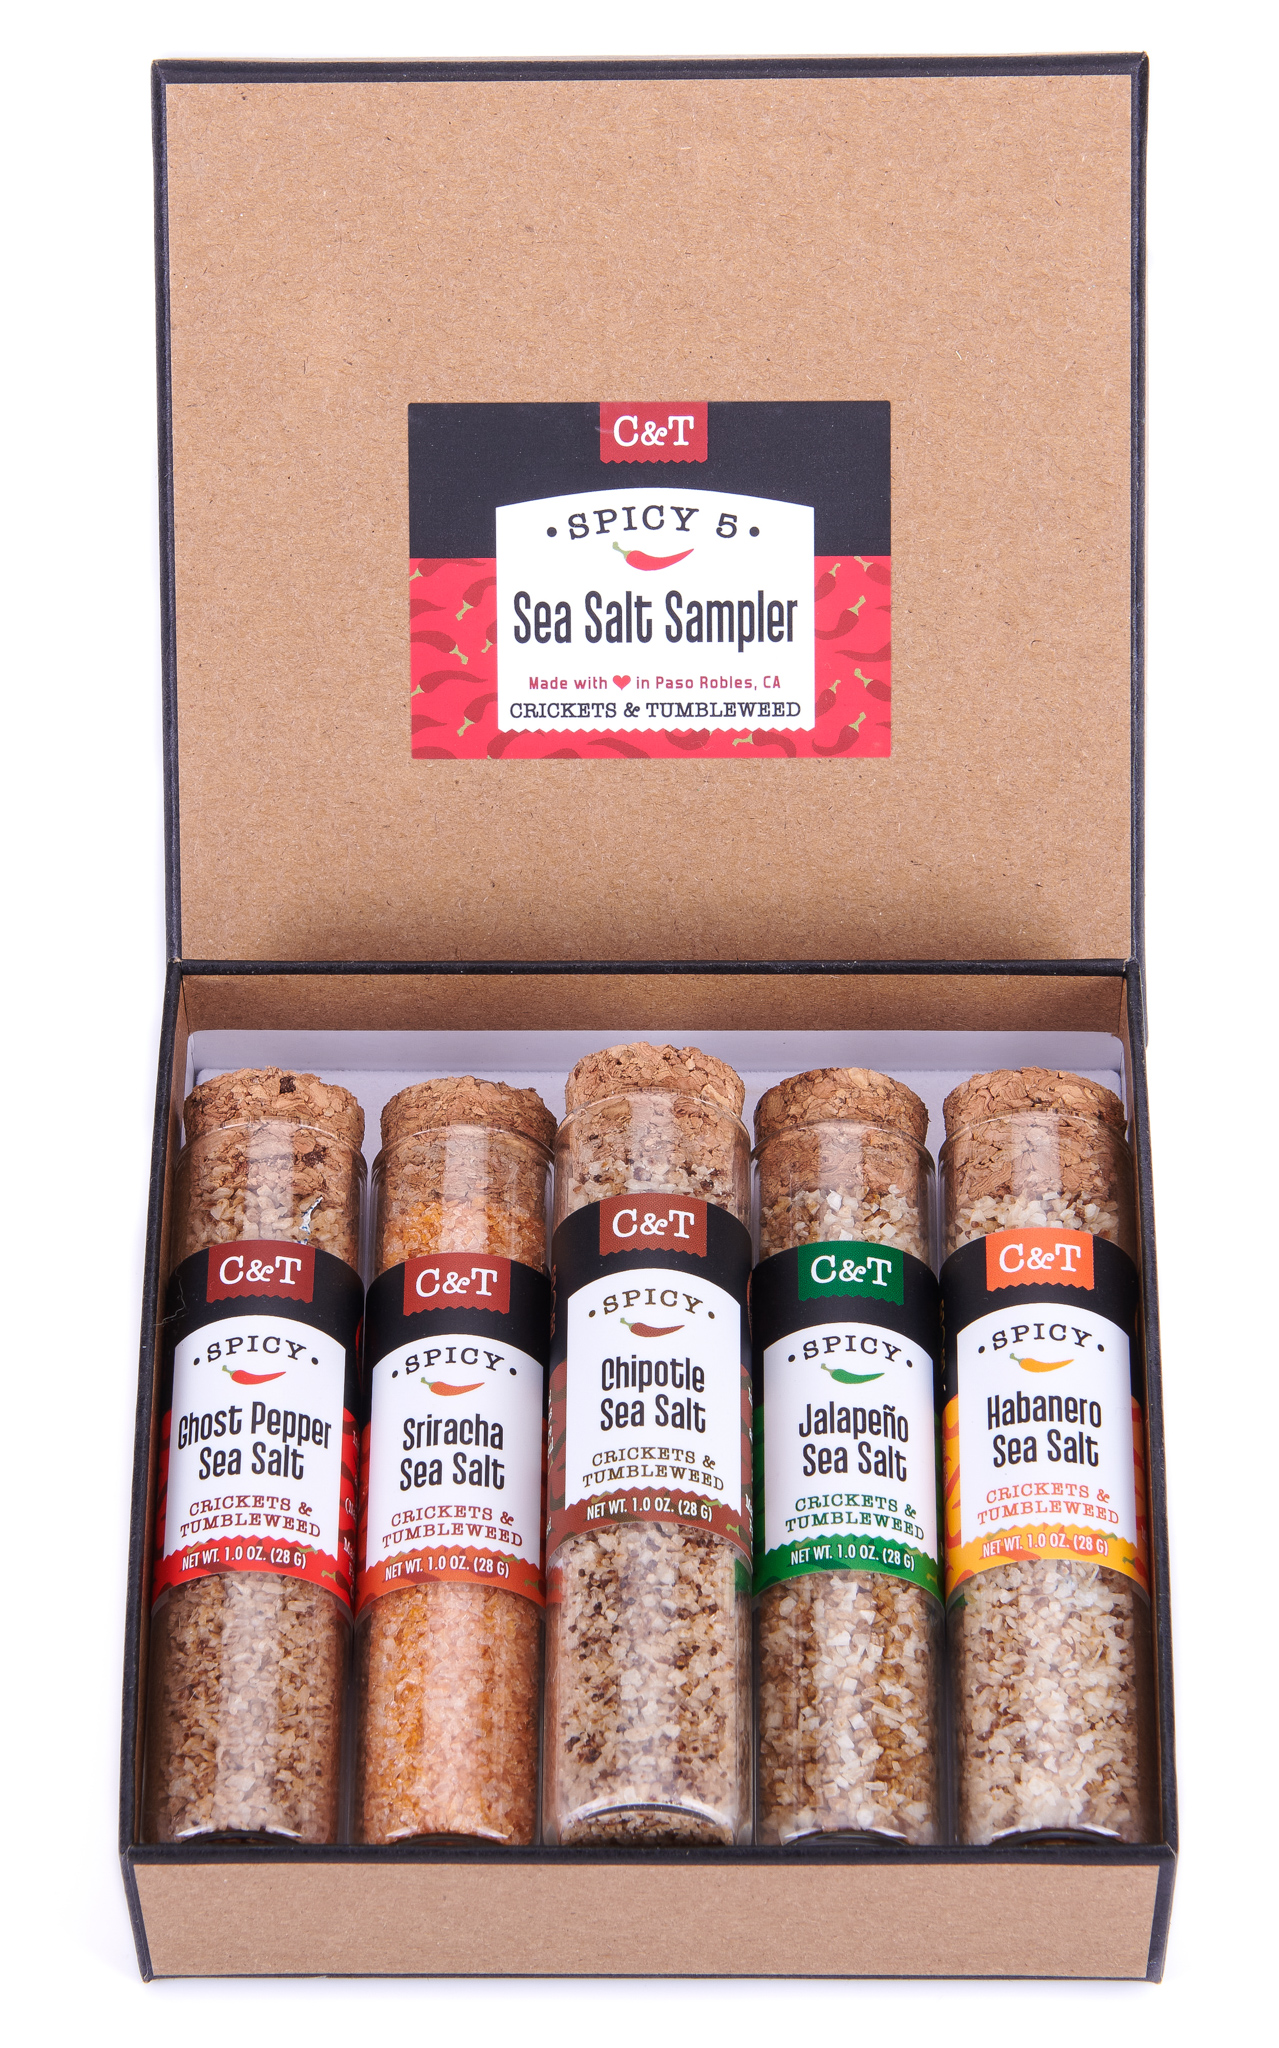 Product Image for C&T Sea Salt Sampler Spicy 5